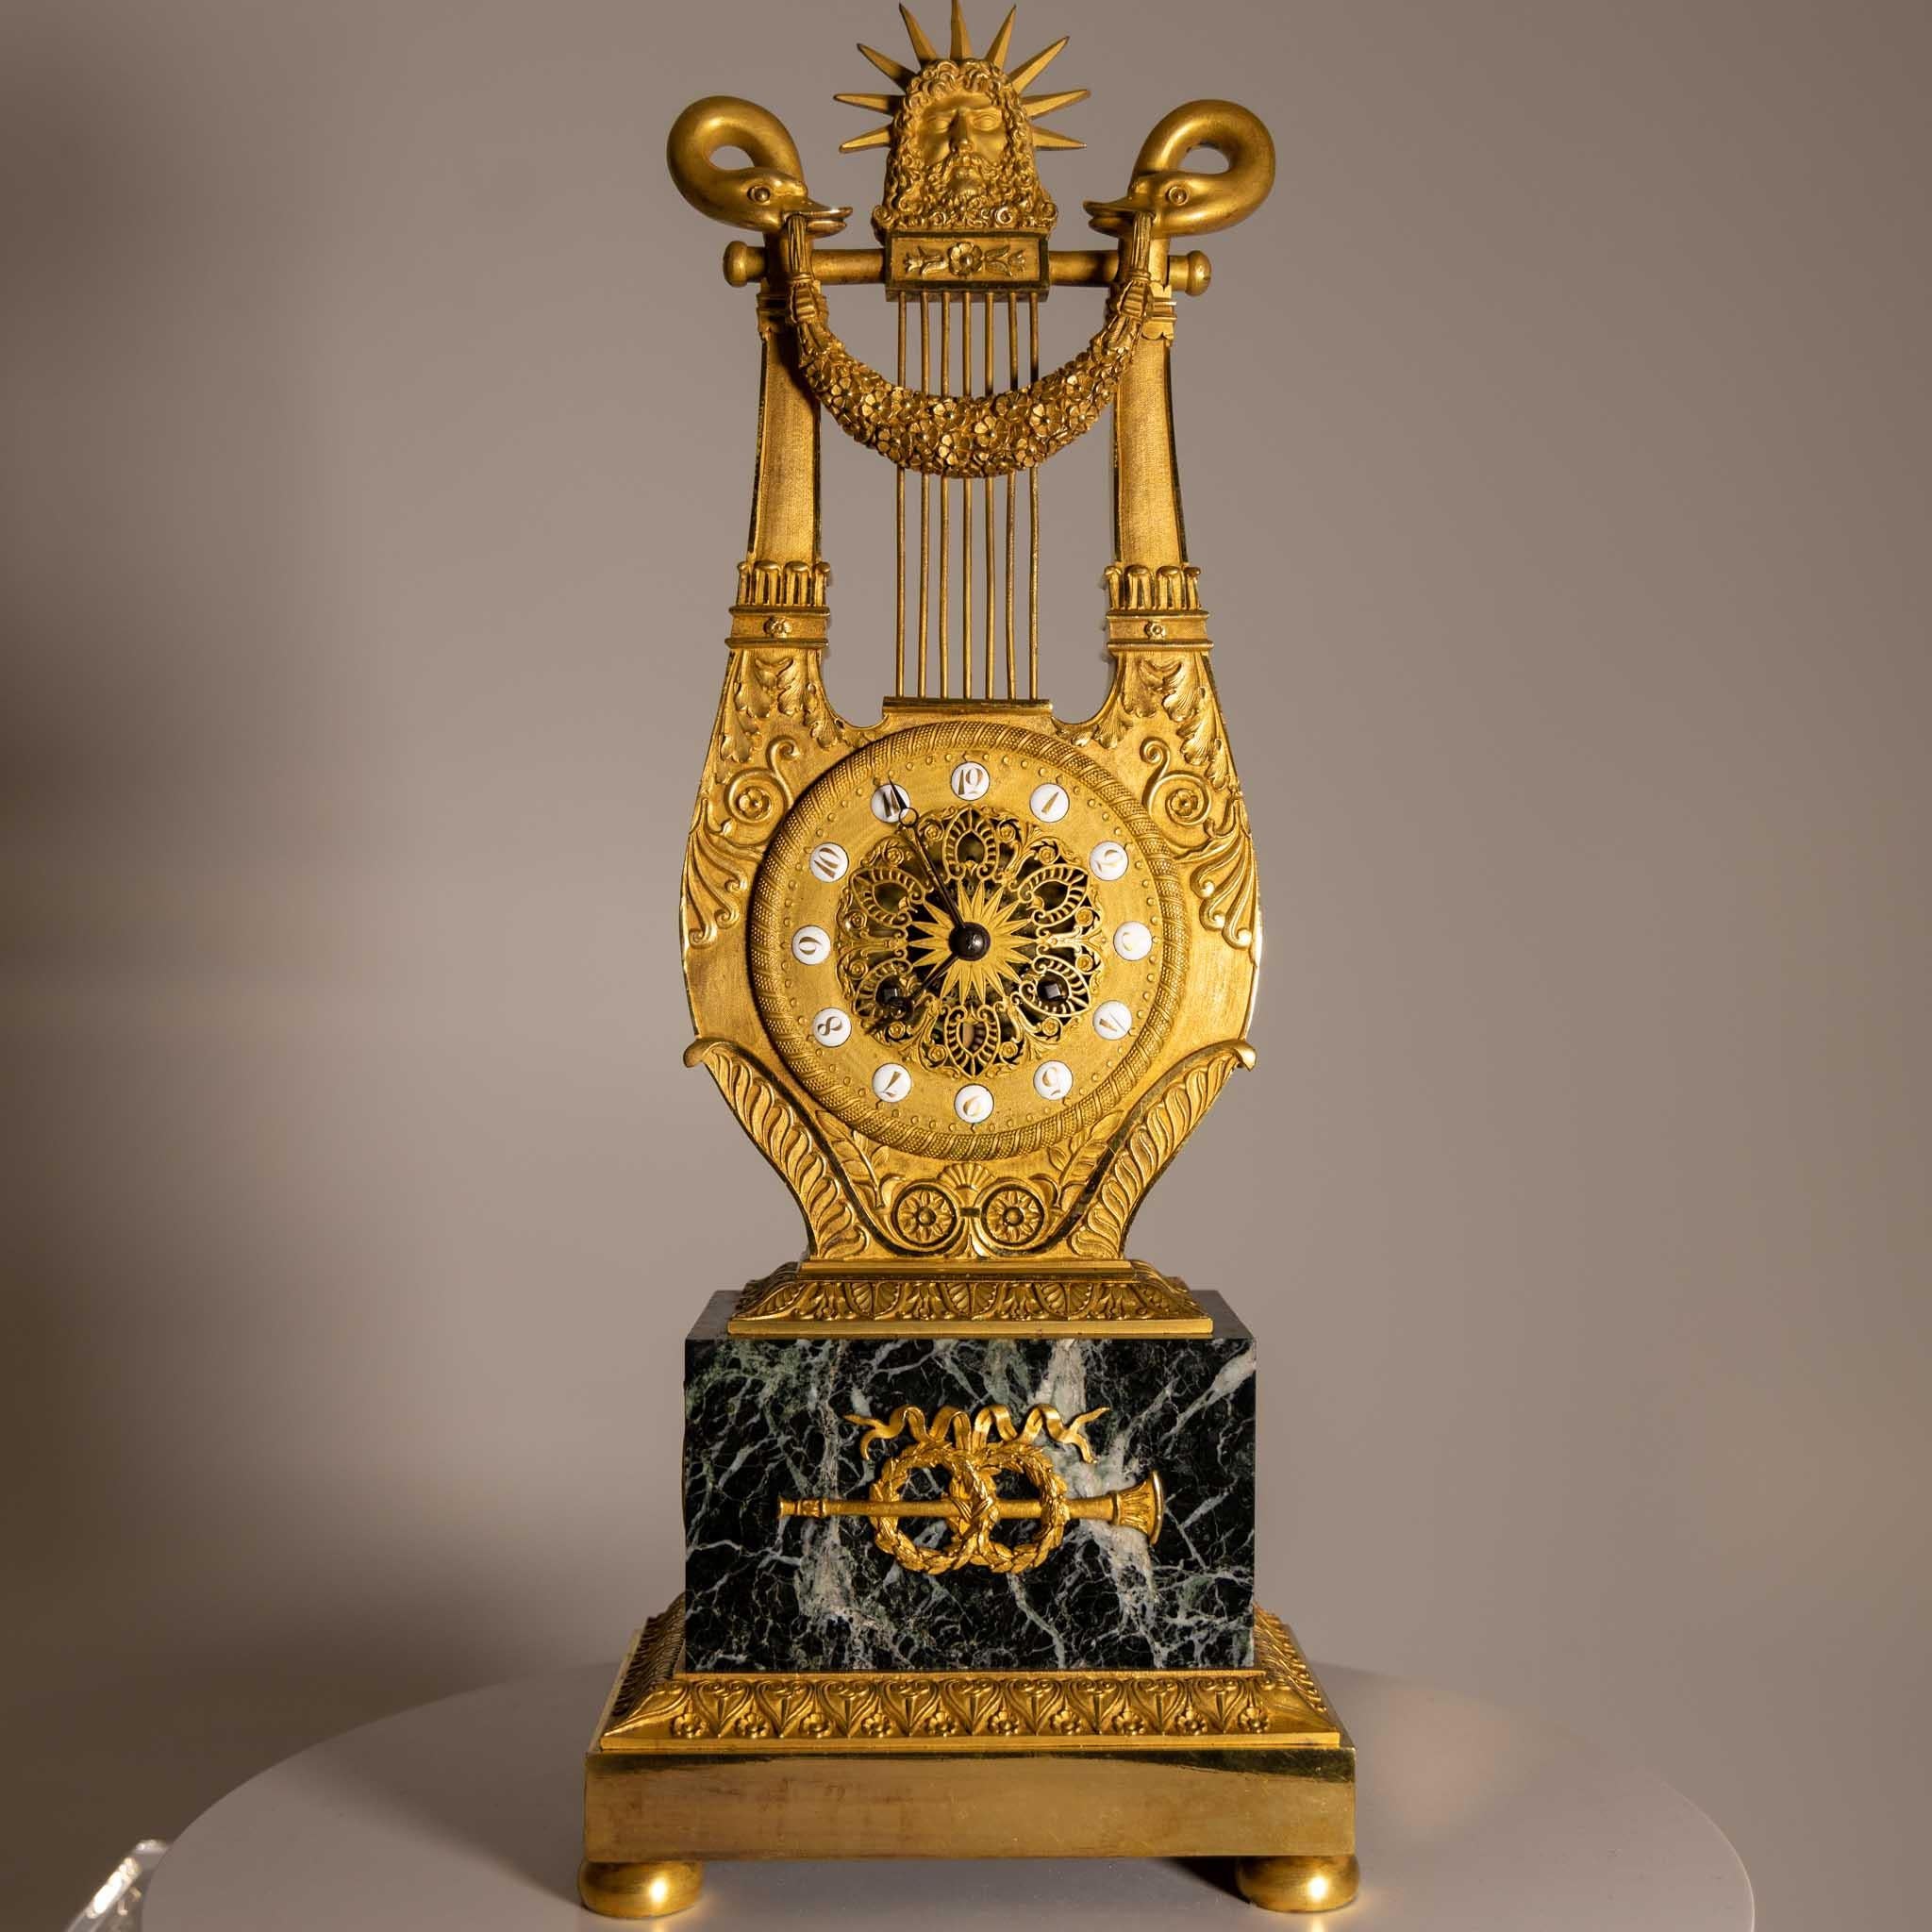 Lyre-shaped mantel clock on marble base with crowning head of sun god Apollo and swan heads holding a flower festoon in their beaks. The dial is decorated with round enamel numerals. Fire-gilded bronze. Type illustrated in: Elke Niehüser: French